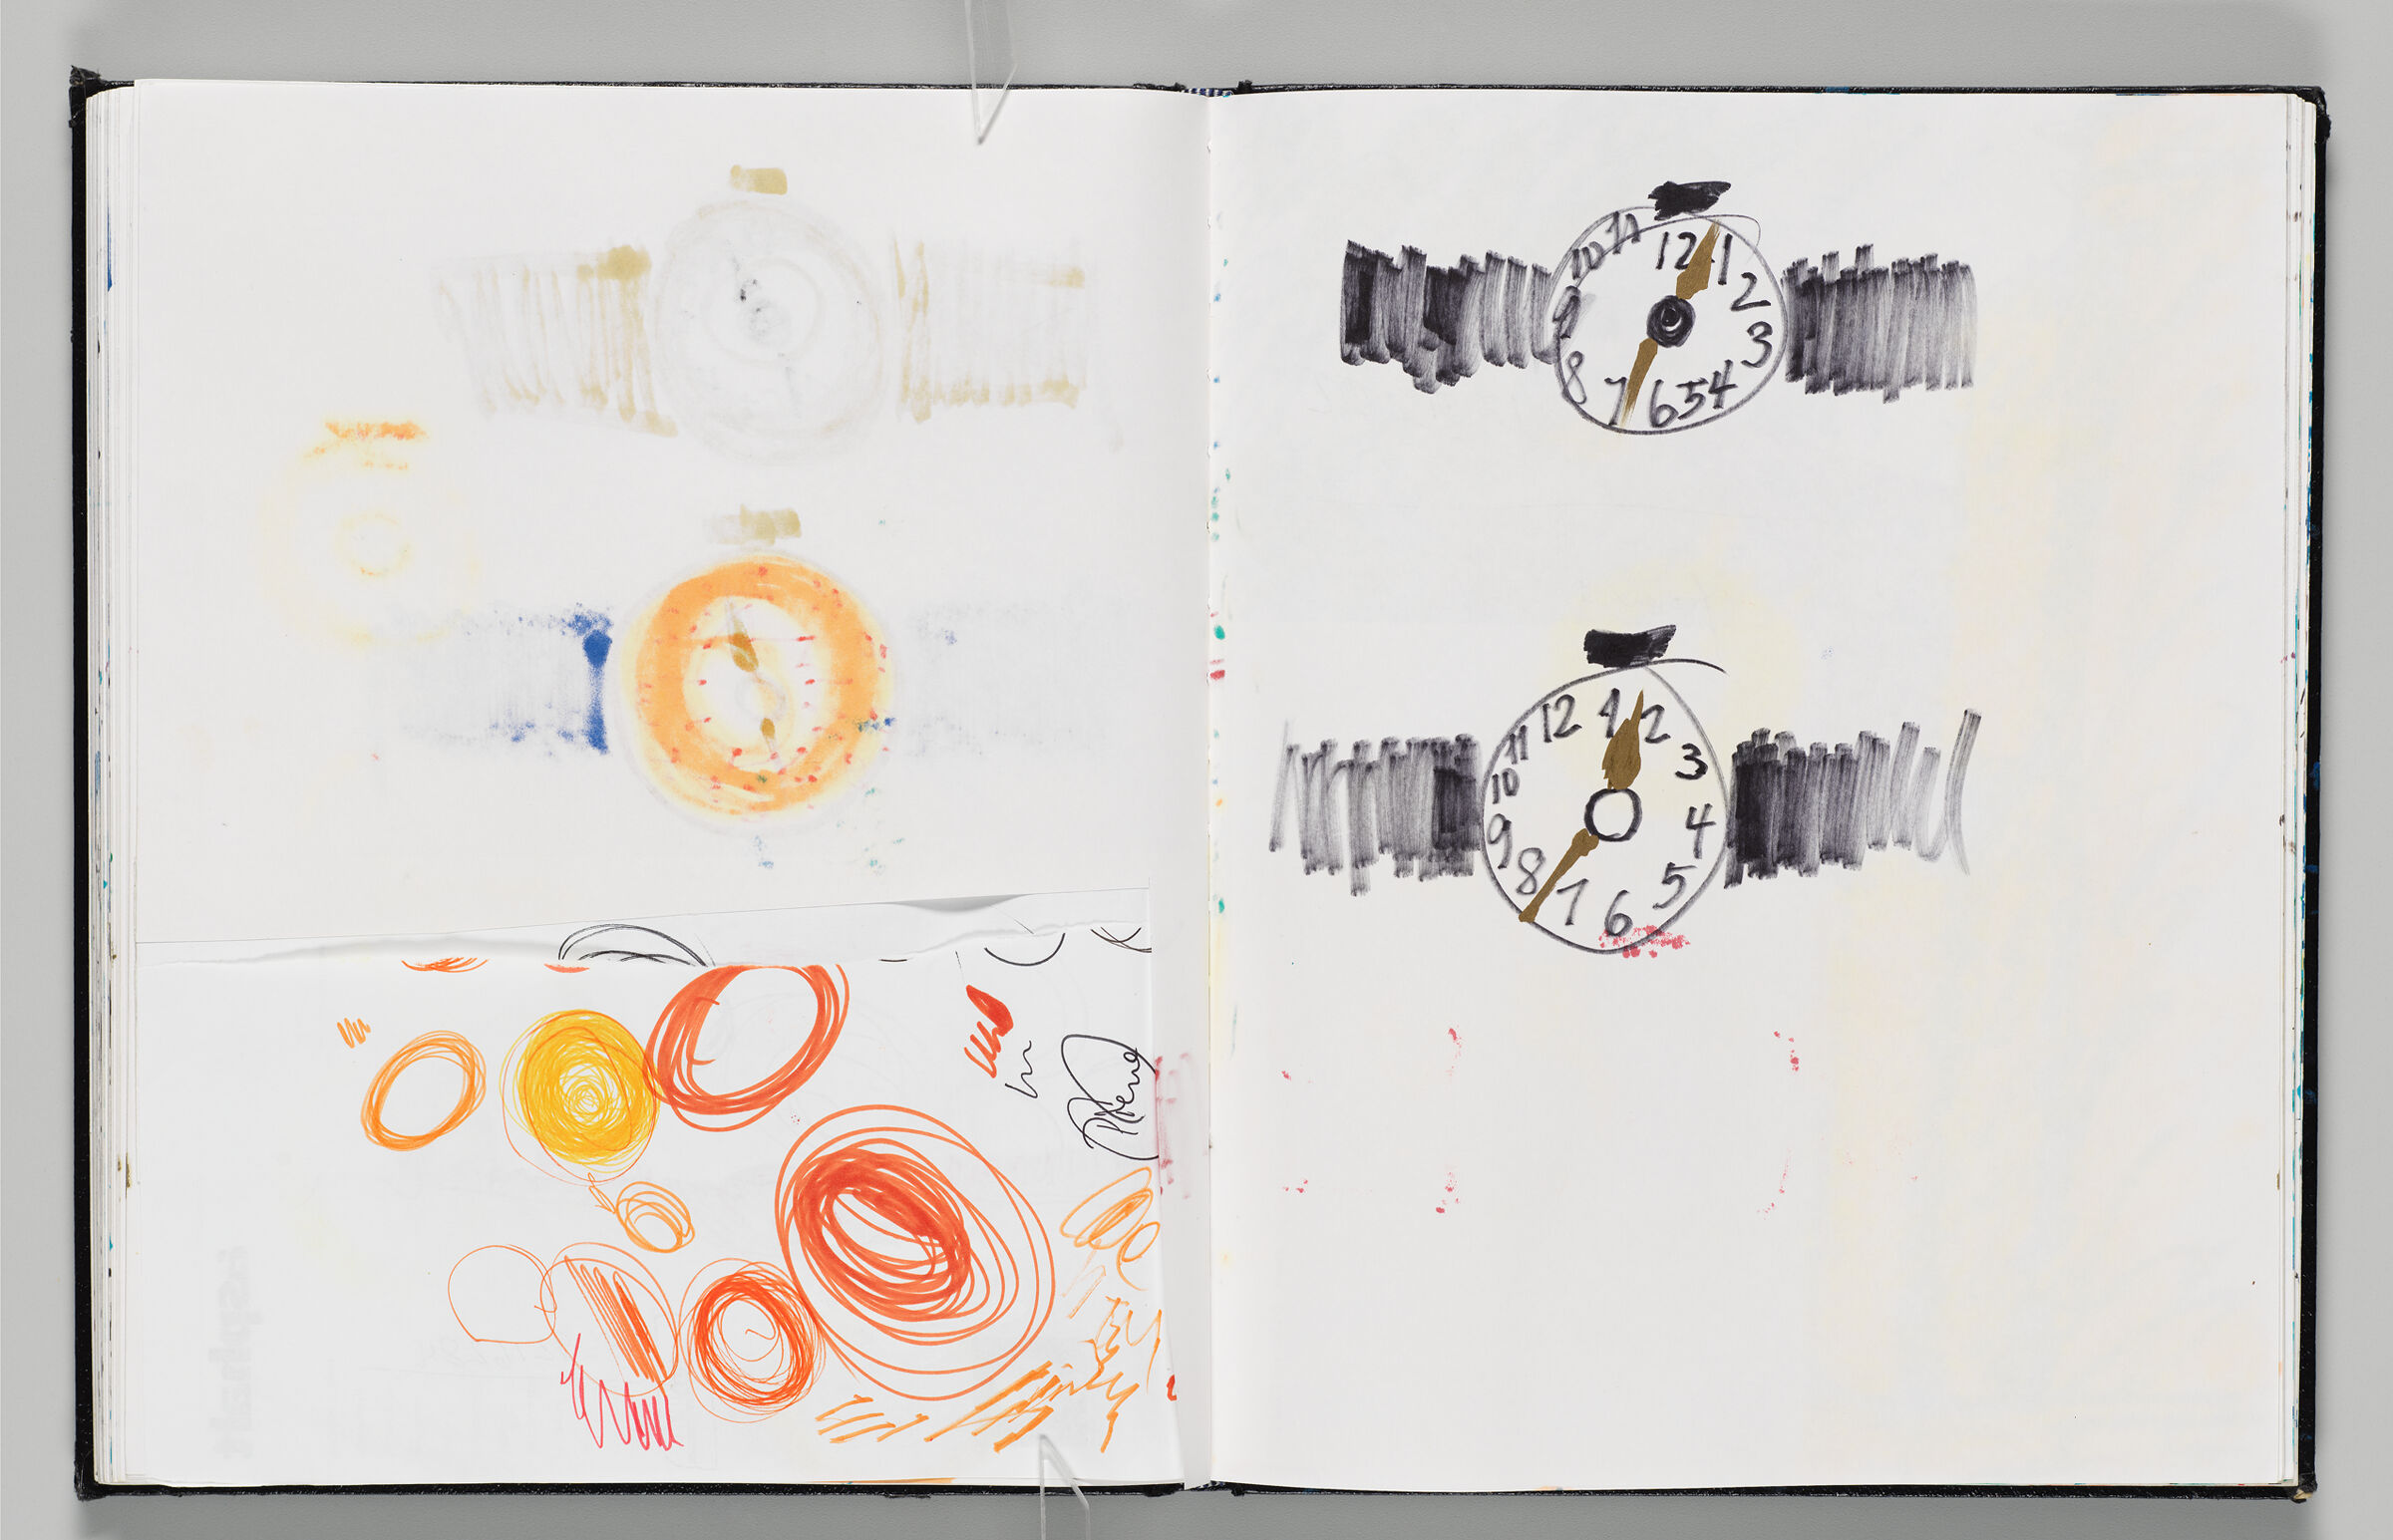 Untitled (Bleed-Through Of Previous Page With Paper Cut Out, Left Page); Untitled (Watch Designs , Right Page)